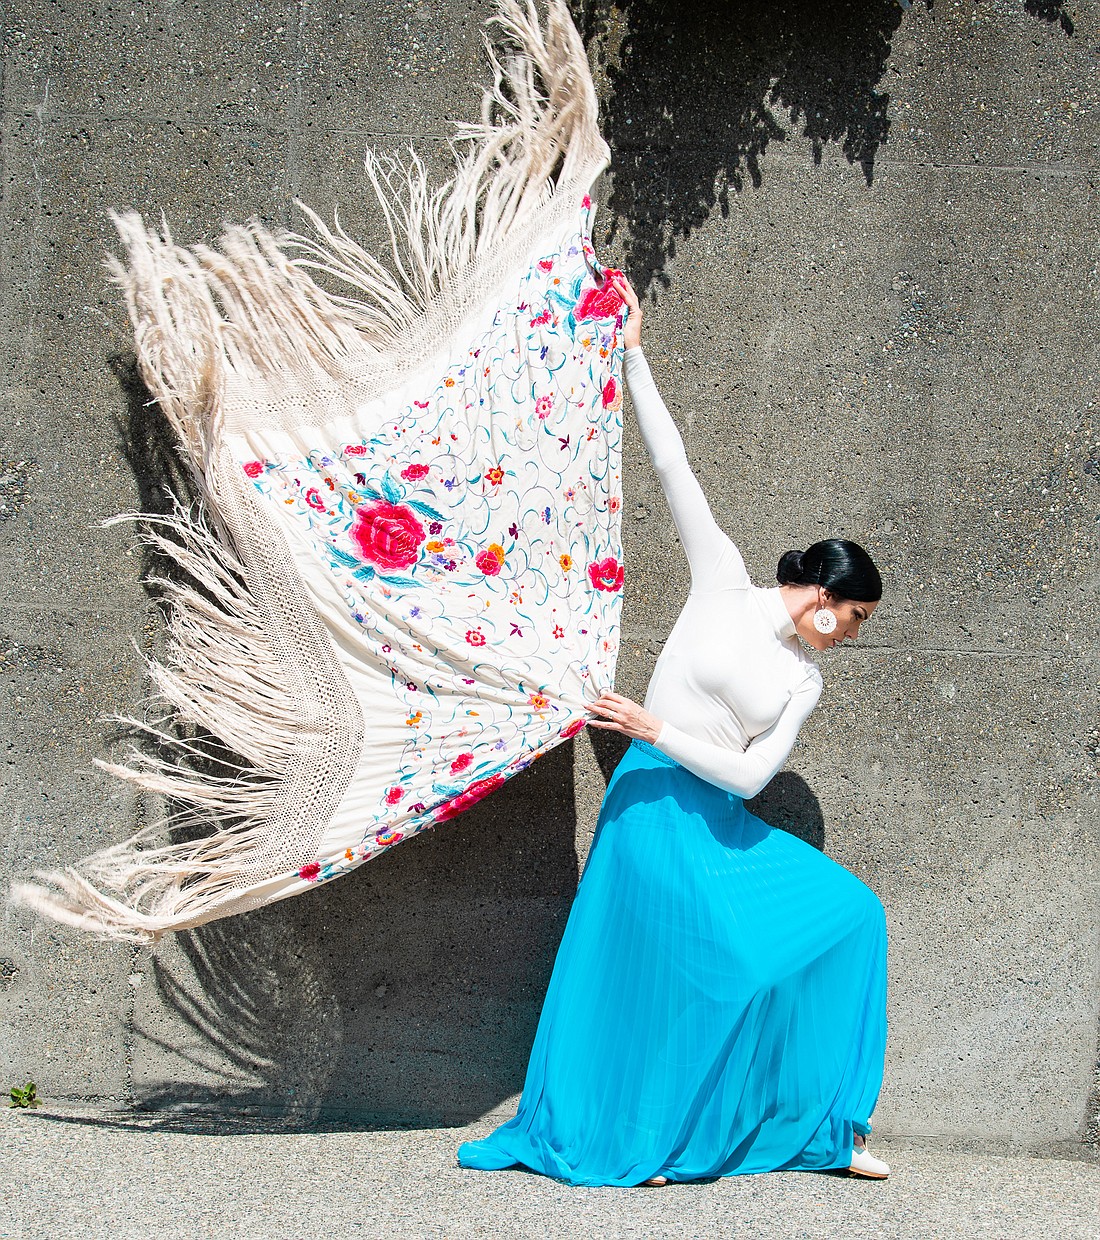 Flamenco dancer Savannah Fuentes and singer/multi-instrumentalist Diego Amador Jr. will perform Wednesday, July 27 at part of their "Night Flowers" tour. Expect authentic Spanish flamenco music and innovative dance.